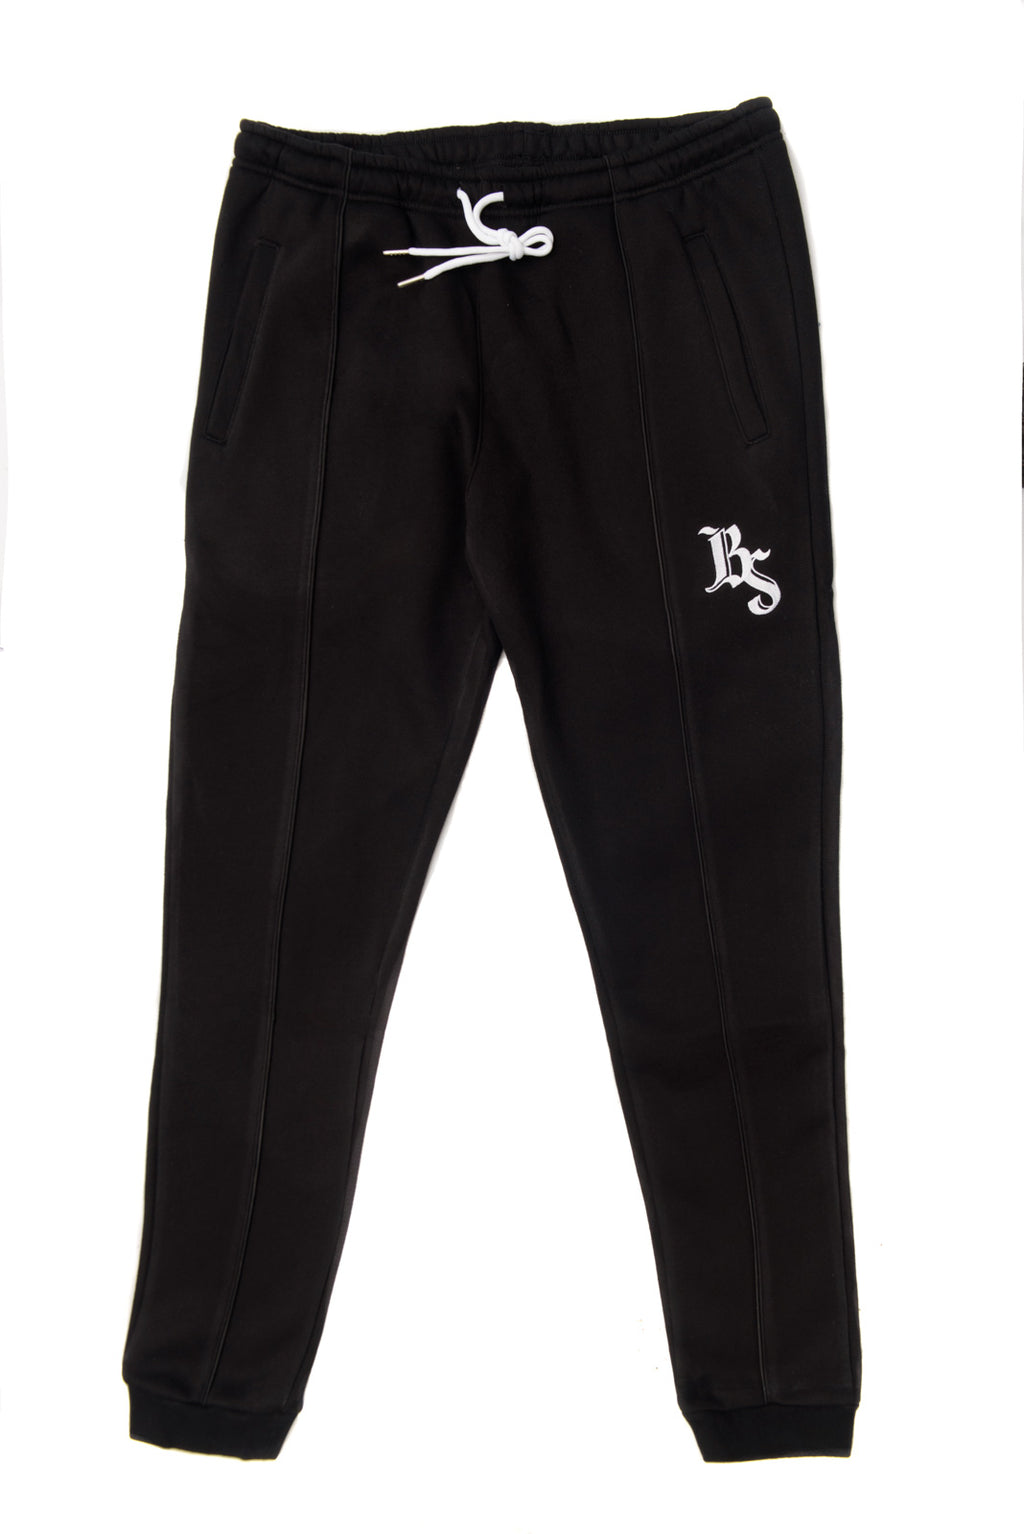 Black Sweats with White BS Logo